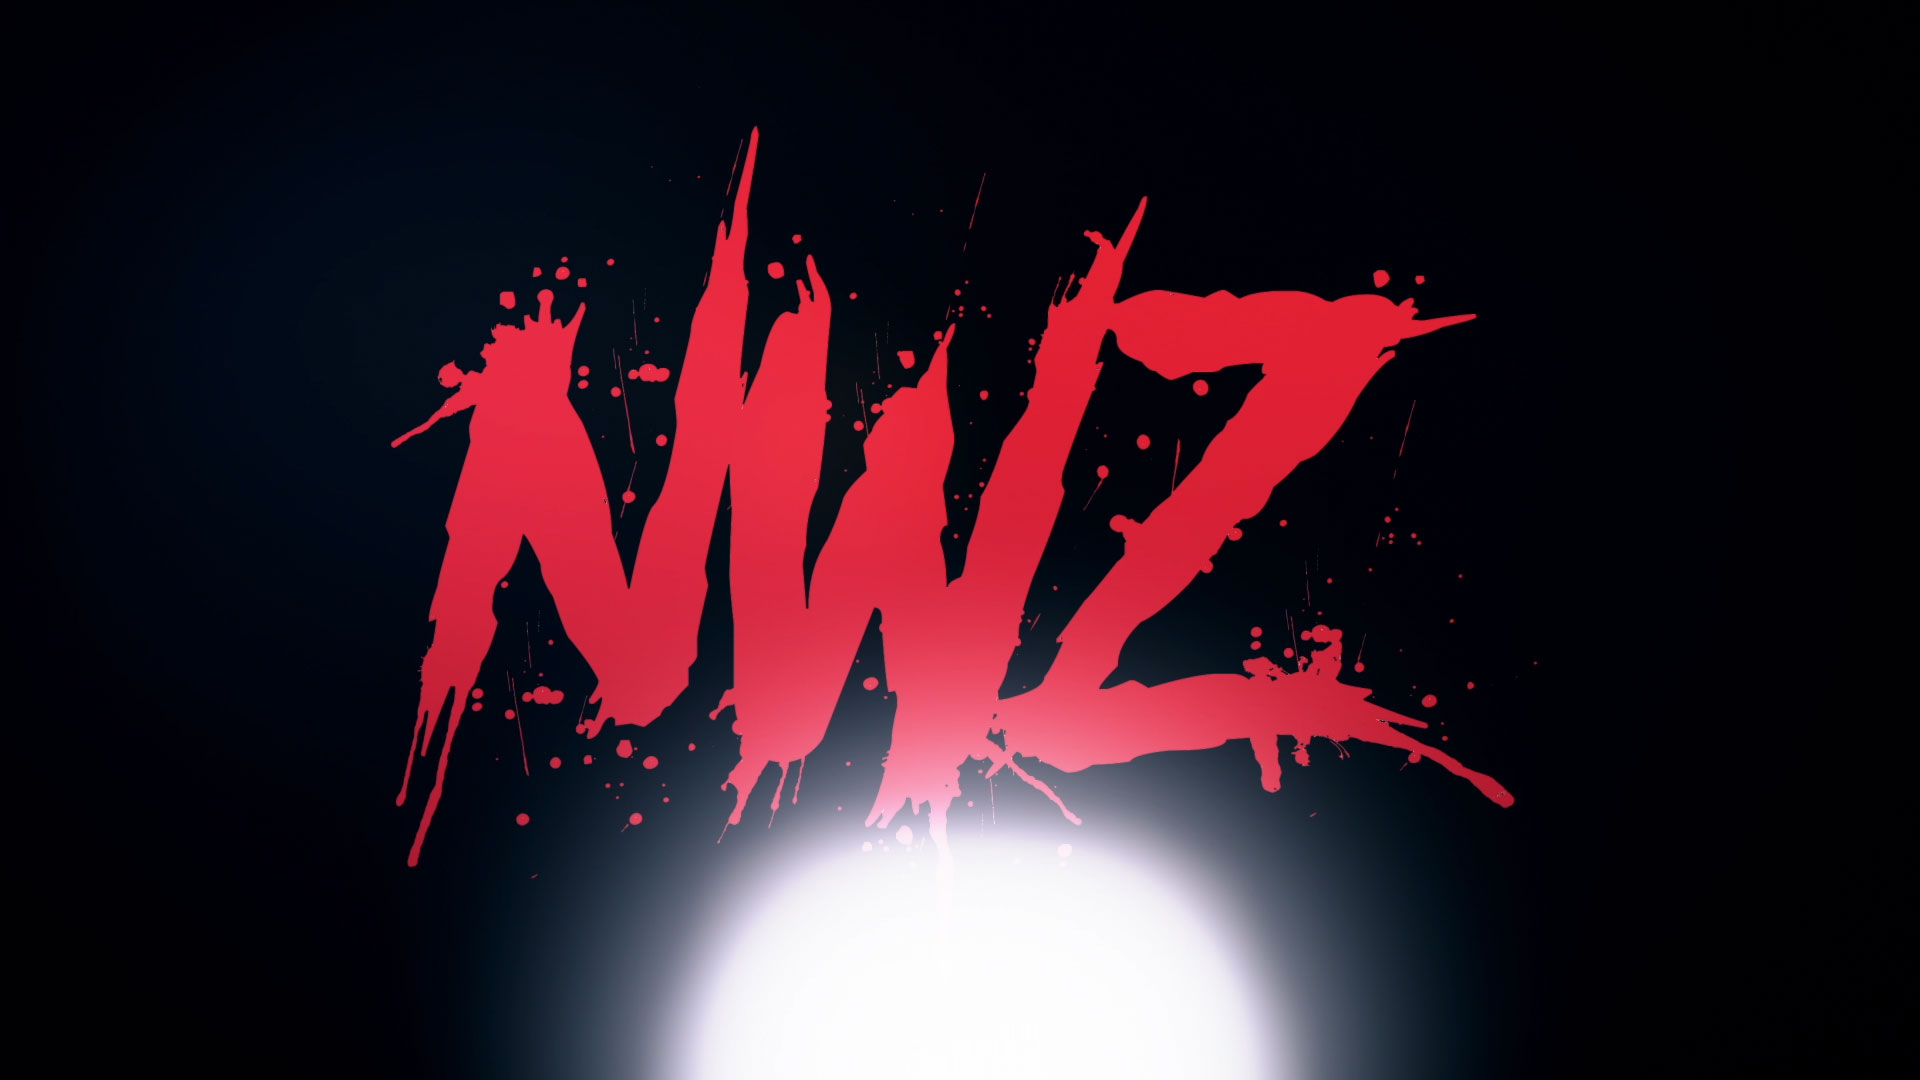 Preview of the trouble video production: "NWZ - ALCHIMISTA'"